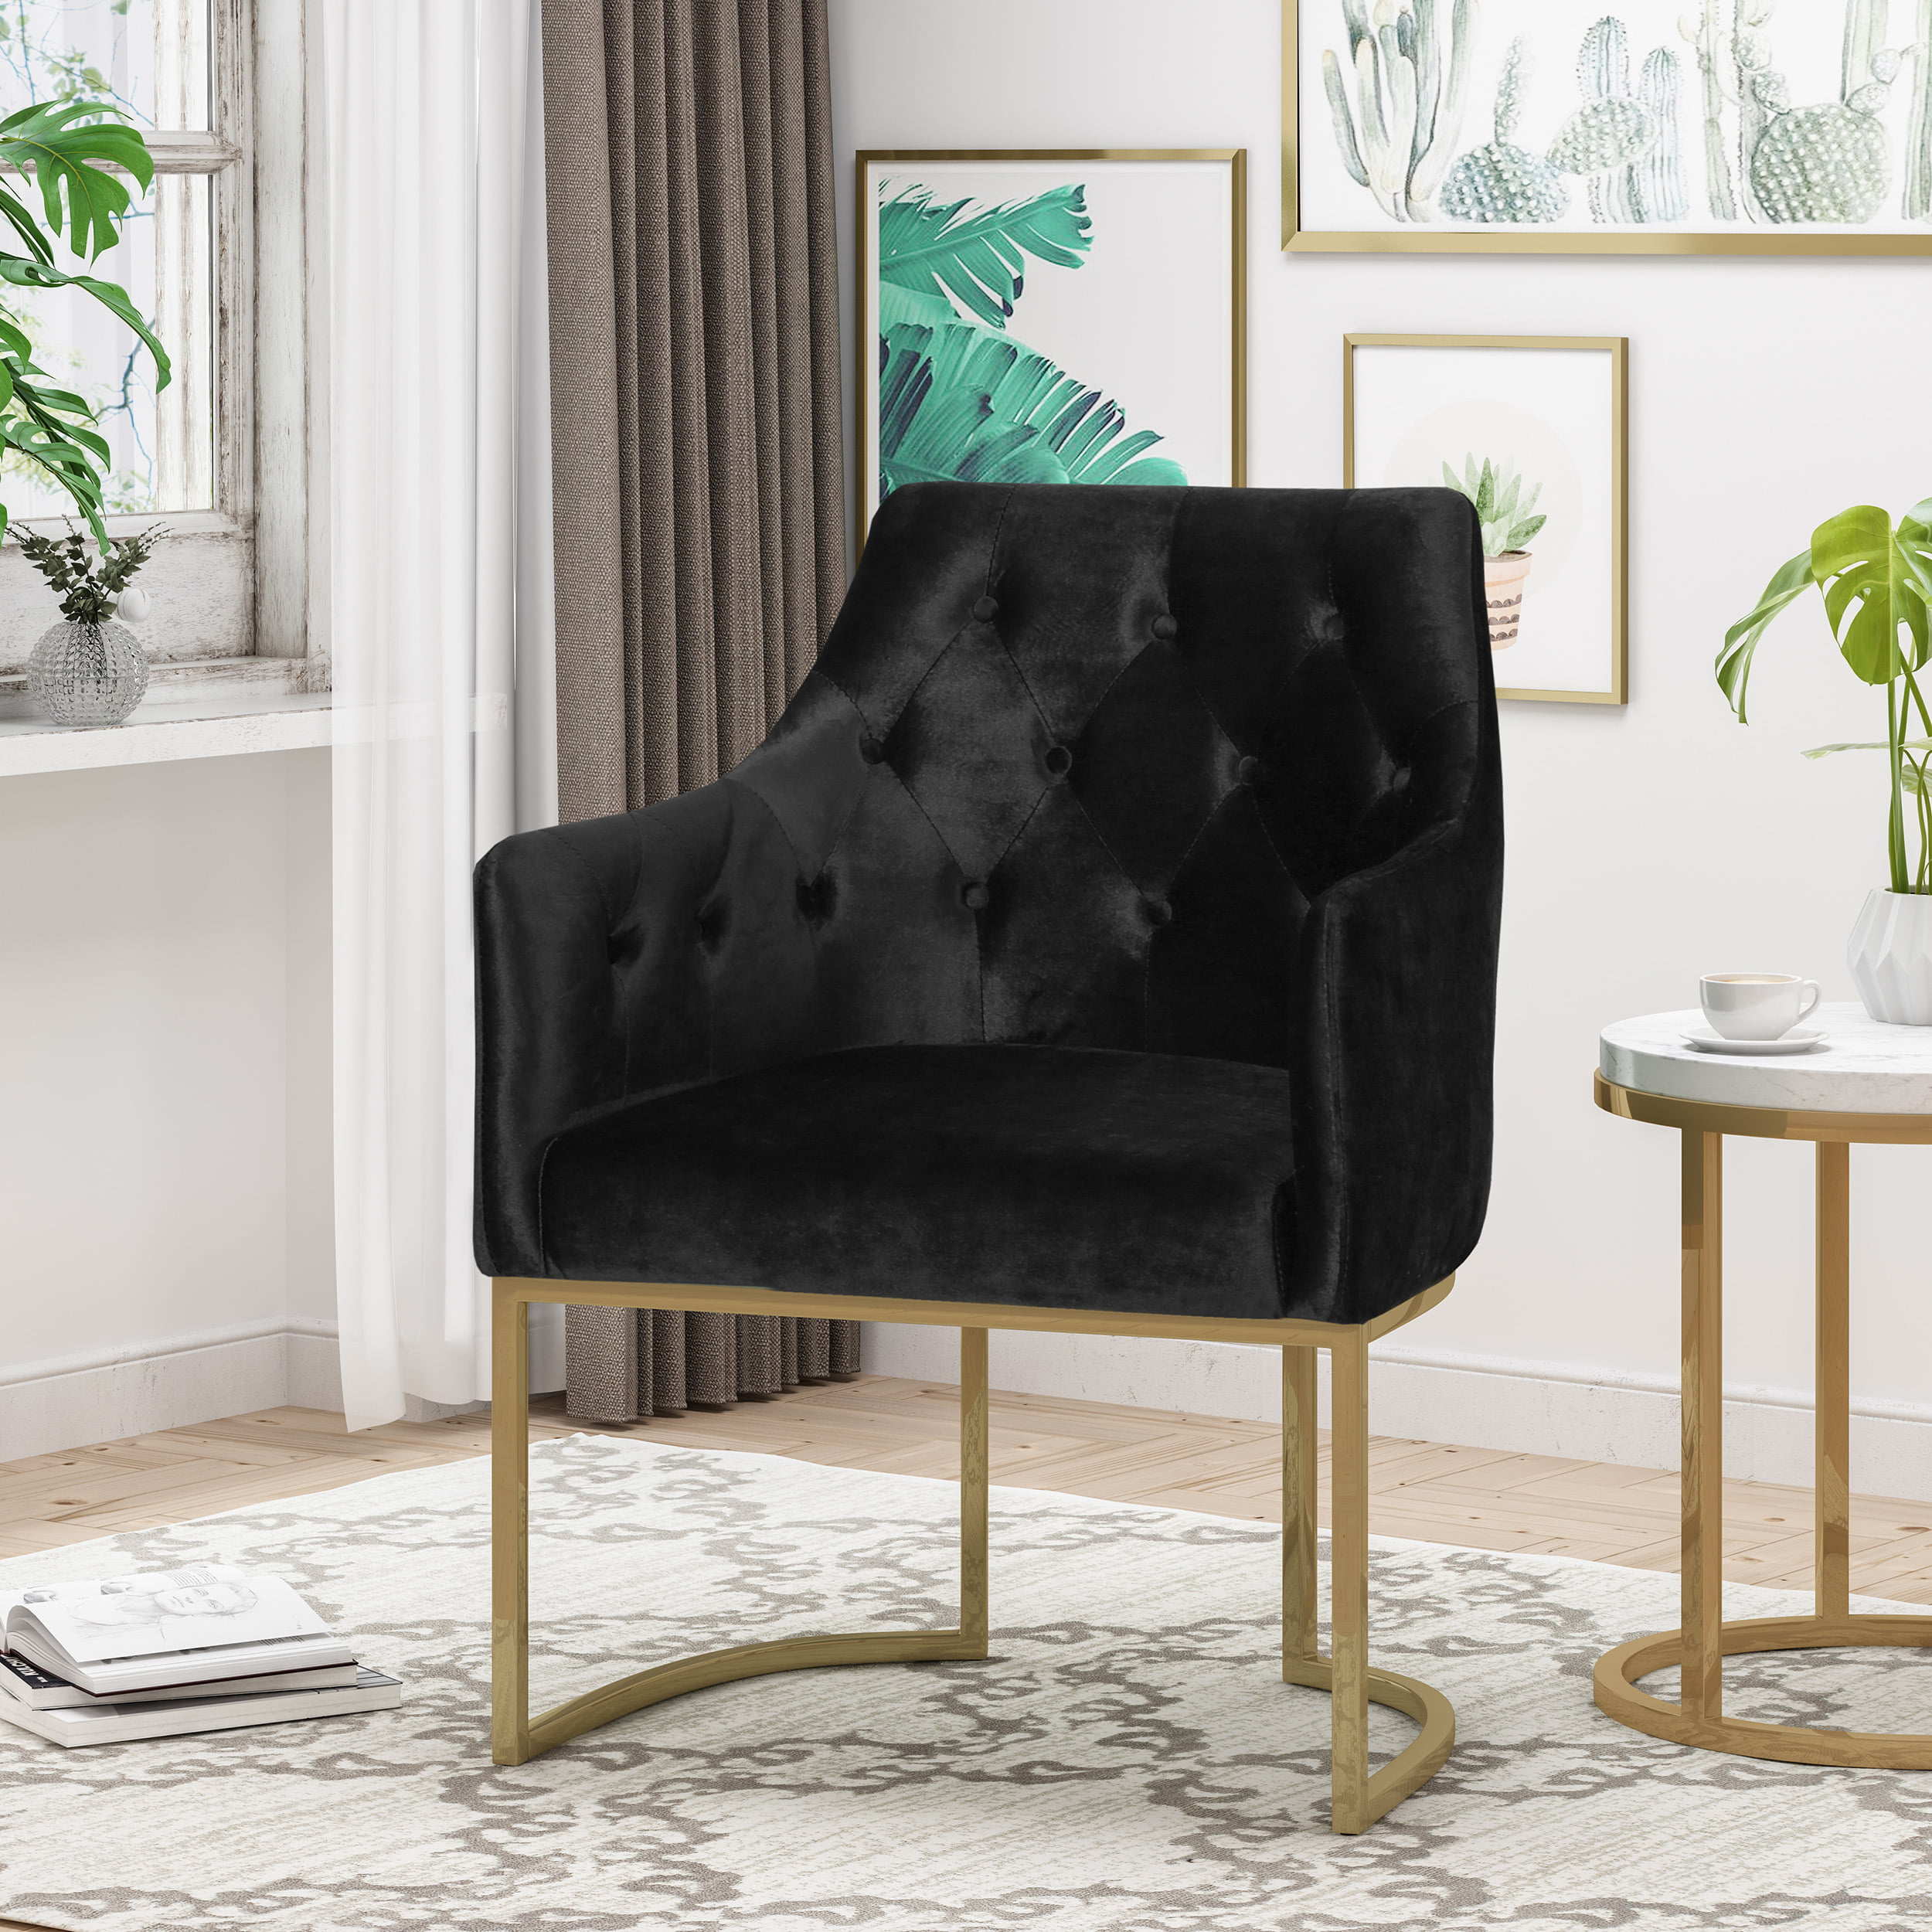 Modern Black And Gold Accent Chair Amazon Com Black